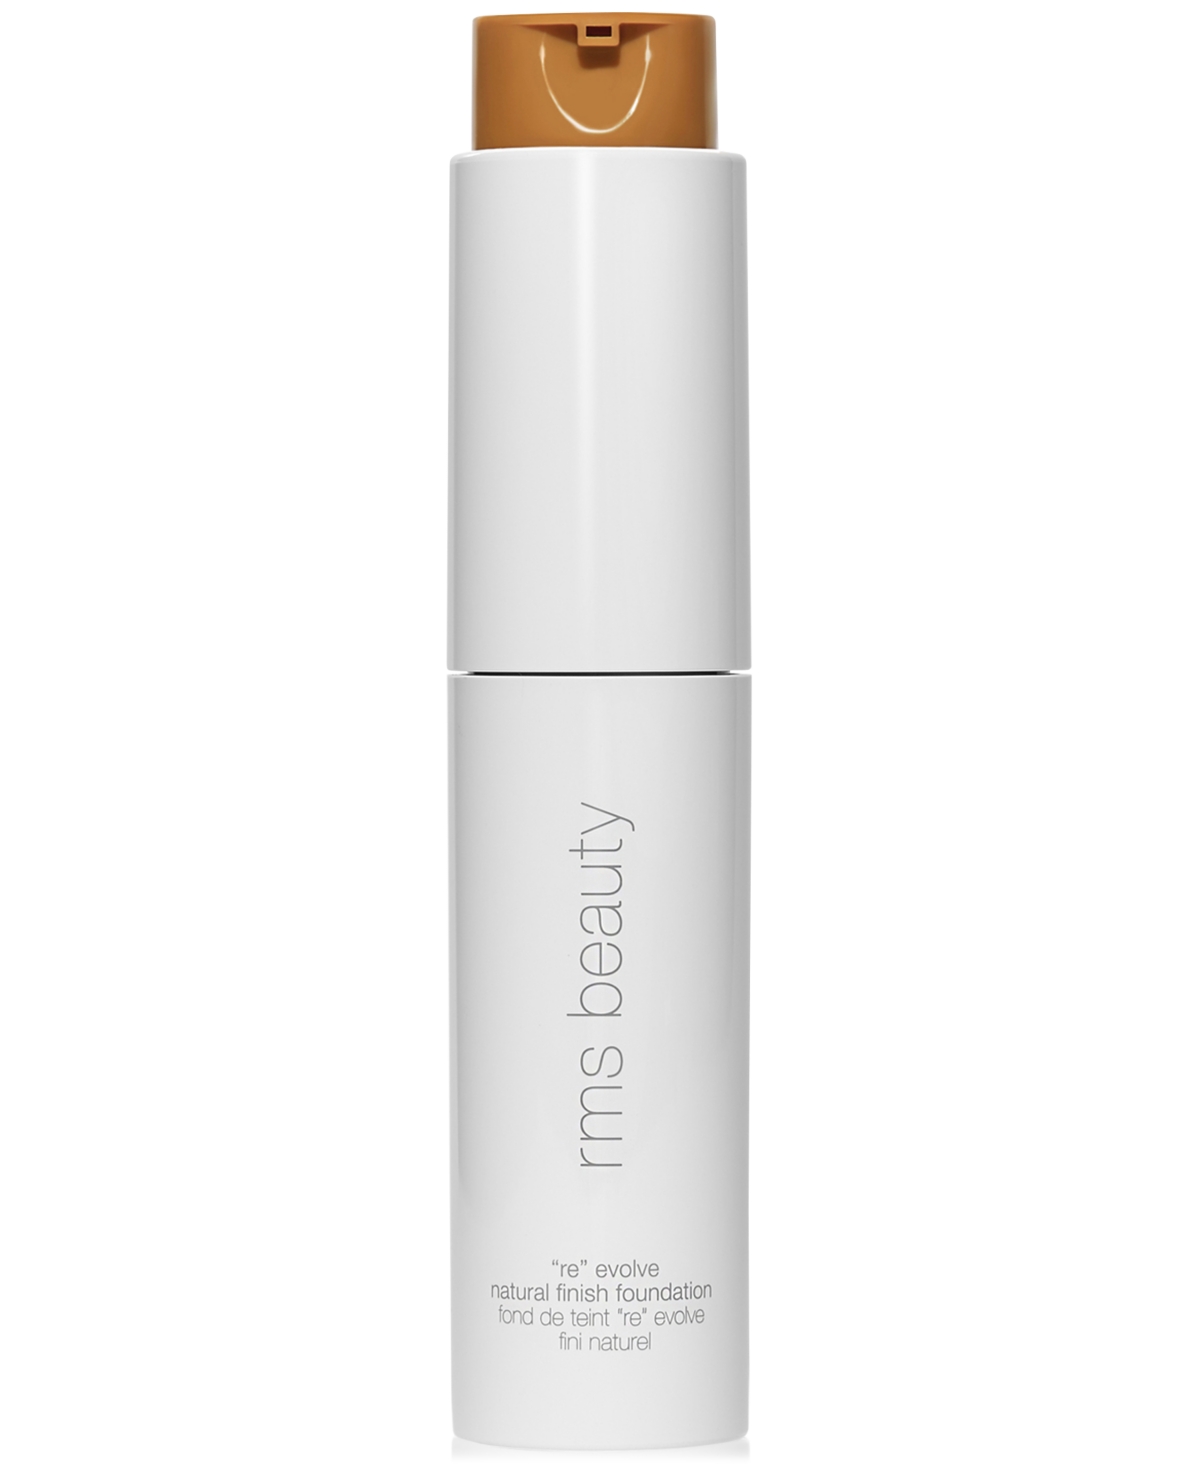 Rms Beauty Reevolve Natural Finish Foundation In Deep Sienna